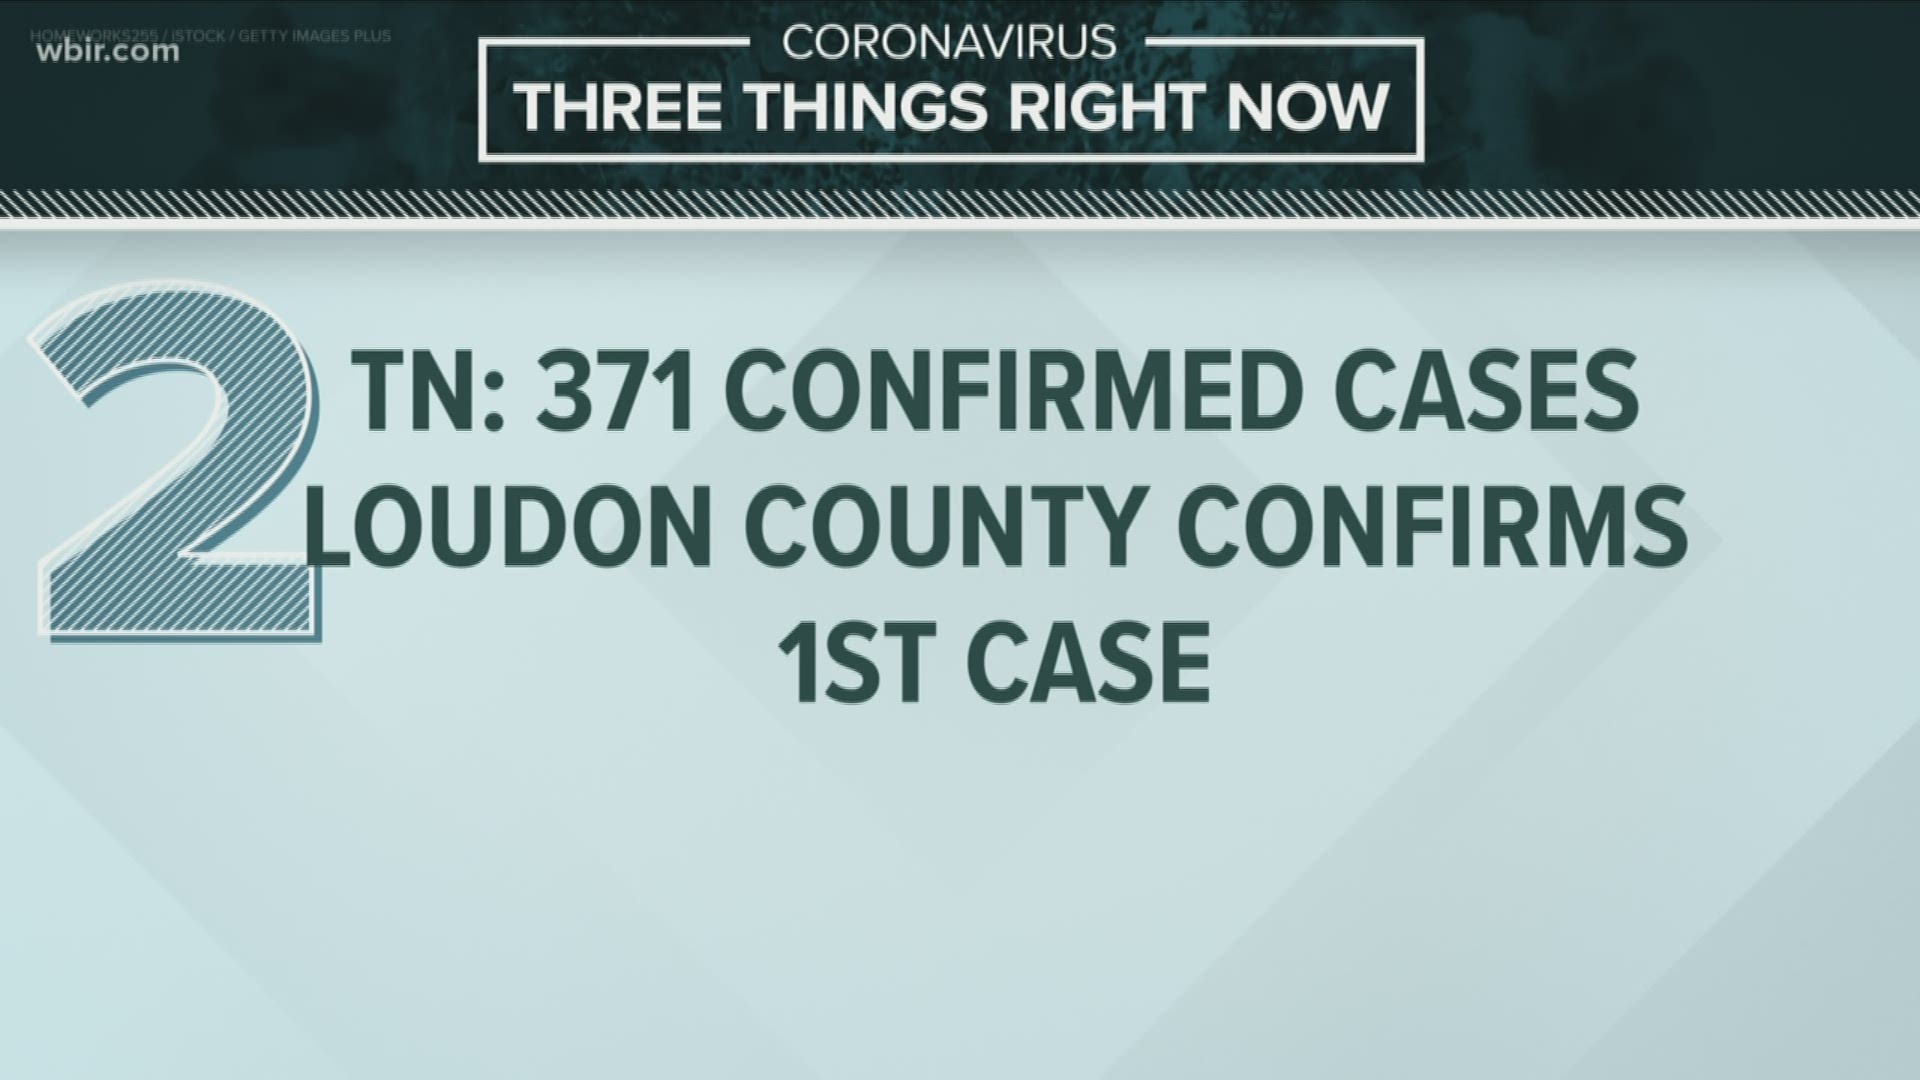 The Loudon County mayor confirmed the county's first case of the coronavirus on Saturday.